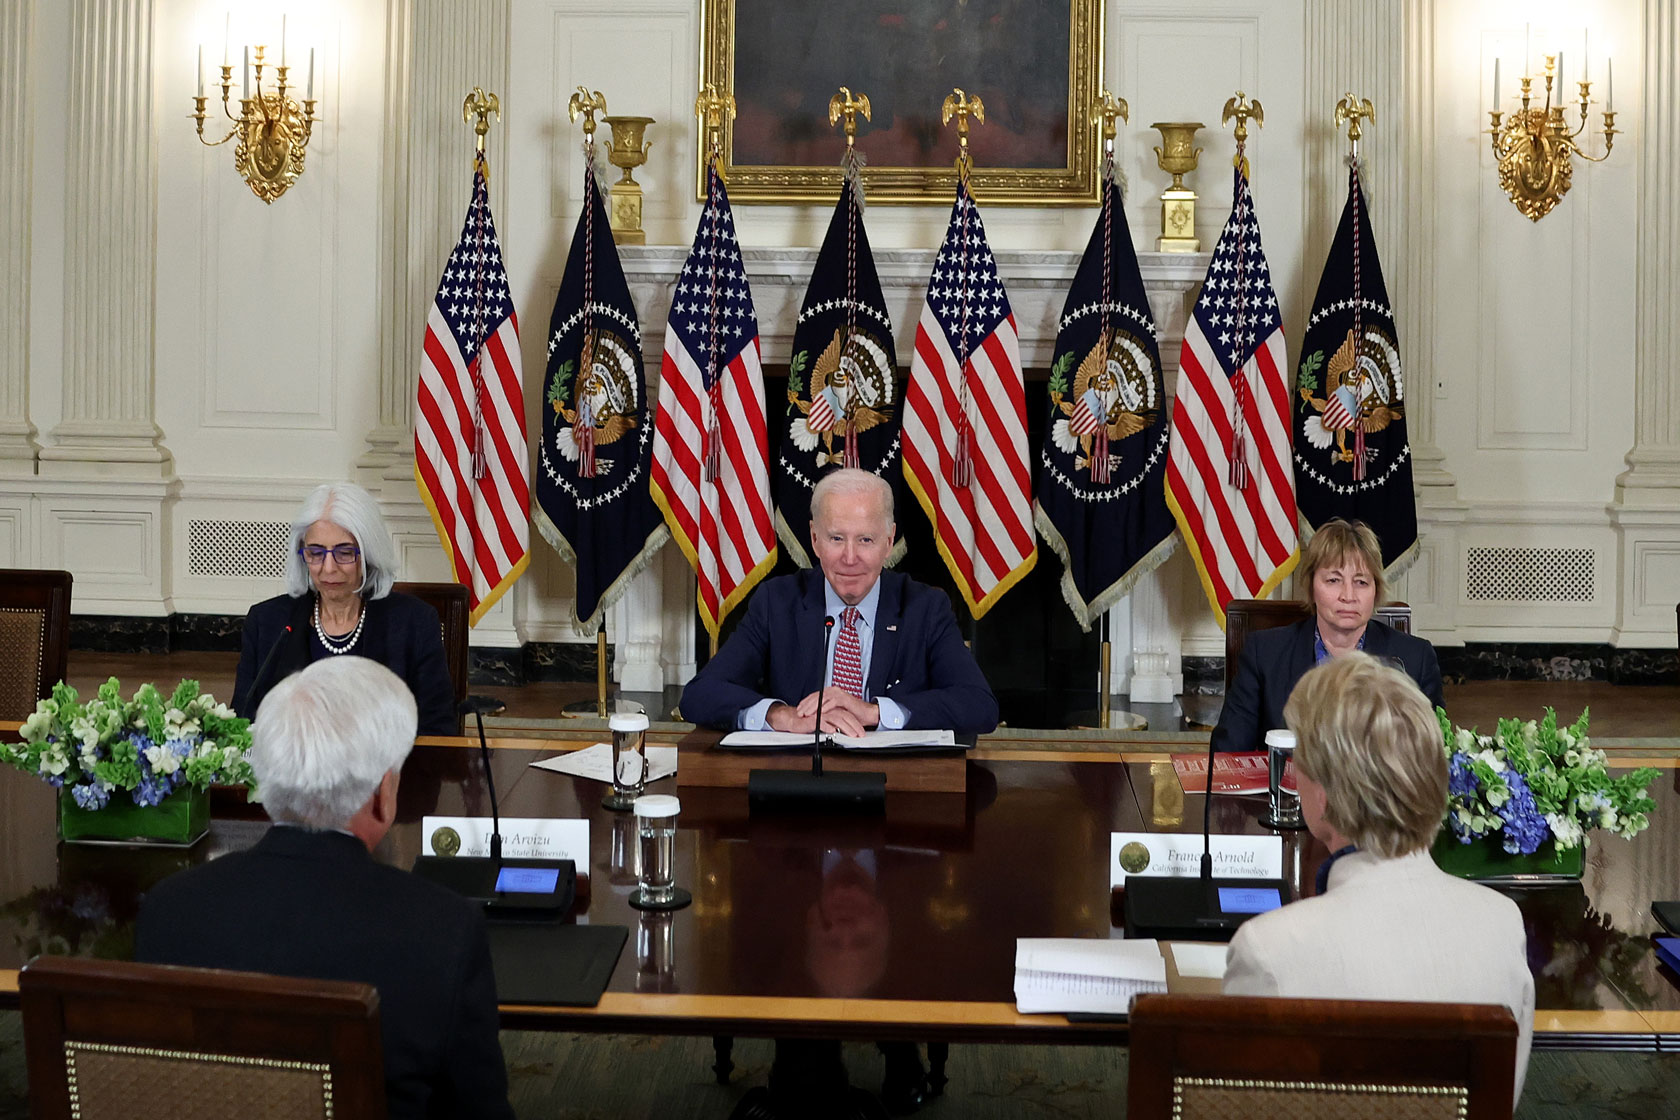 Image showing President Biden seated and surrounded by advisors.